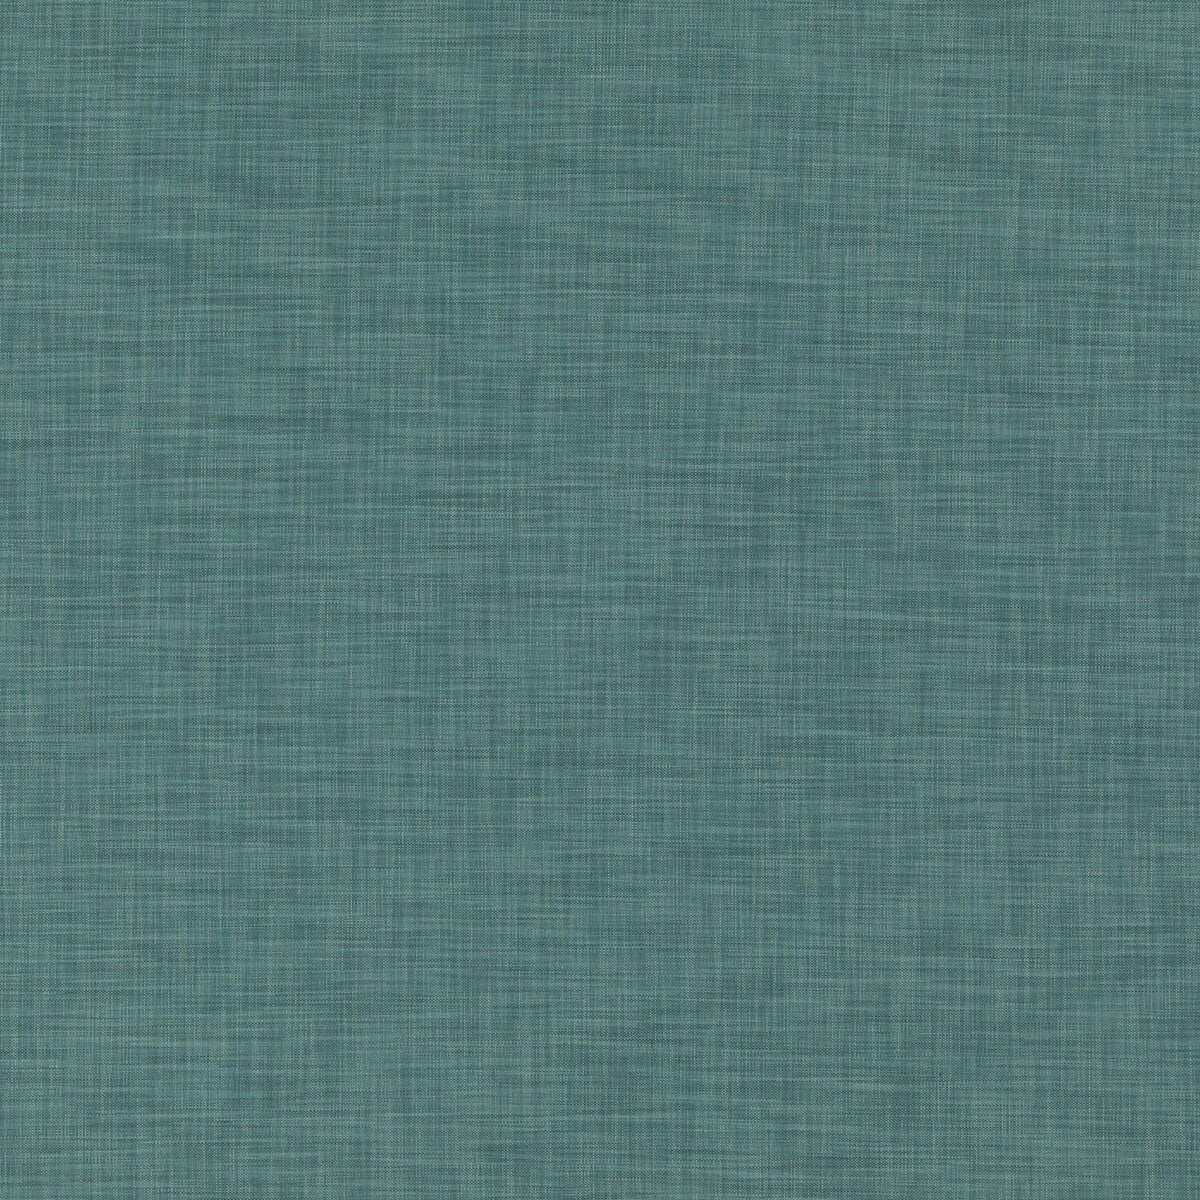 Delamere fabric in teal color - pattern BF10886.615.0 - by G P &amp; J Baker in the Essential Weaves collection